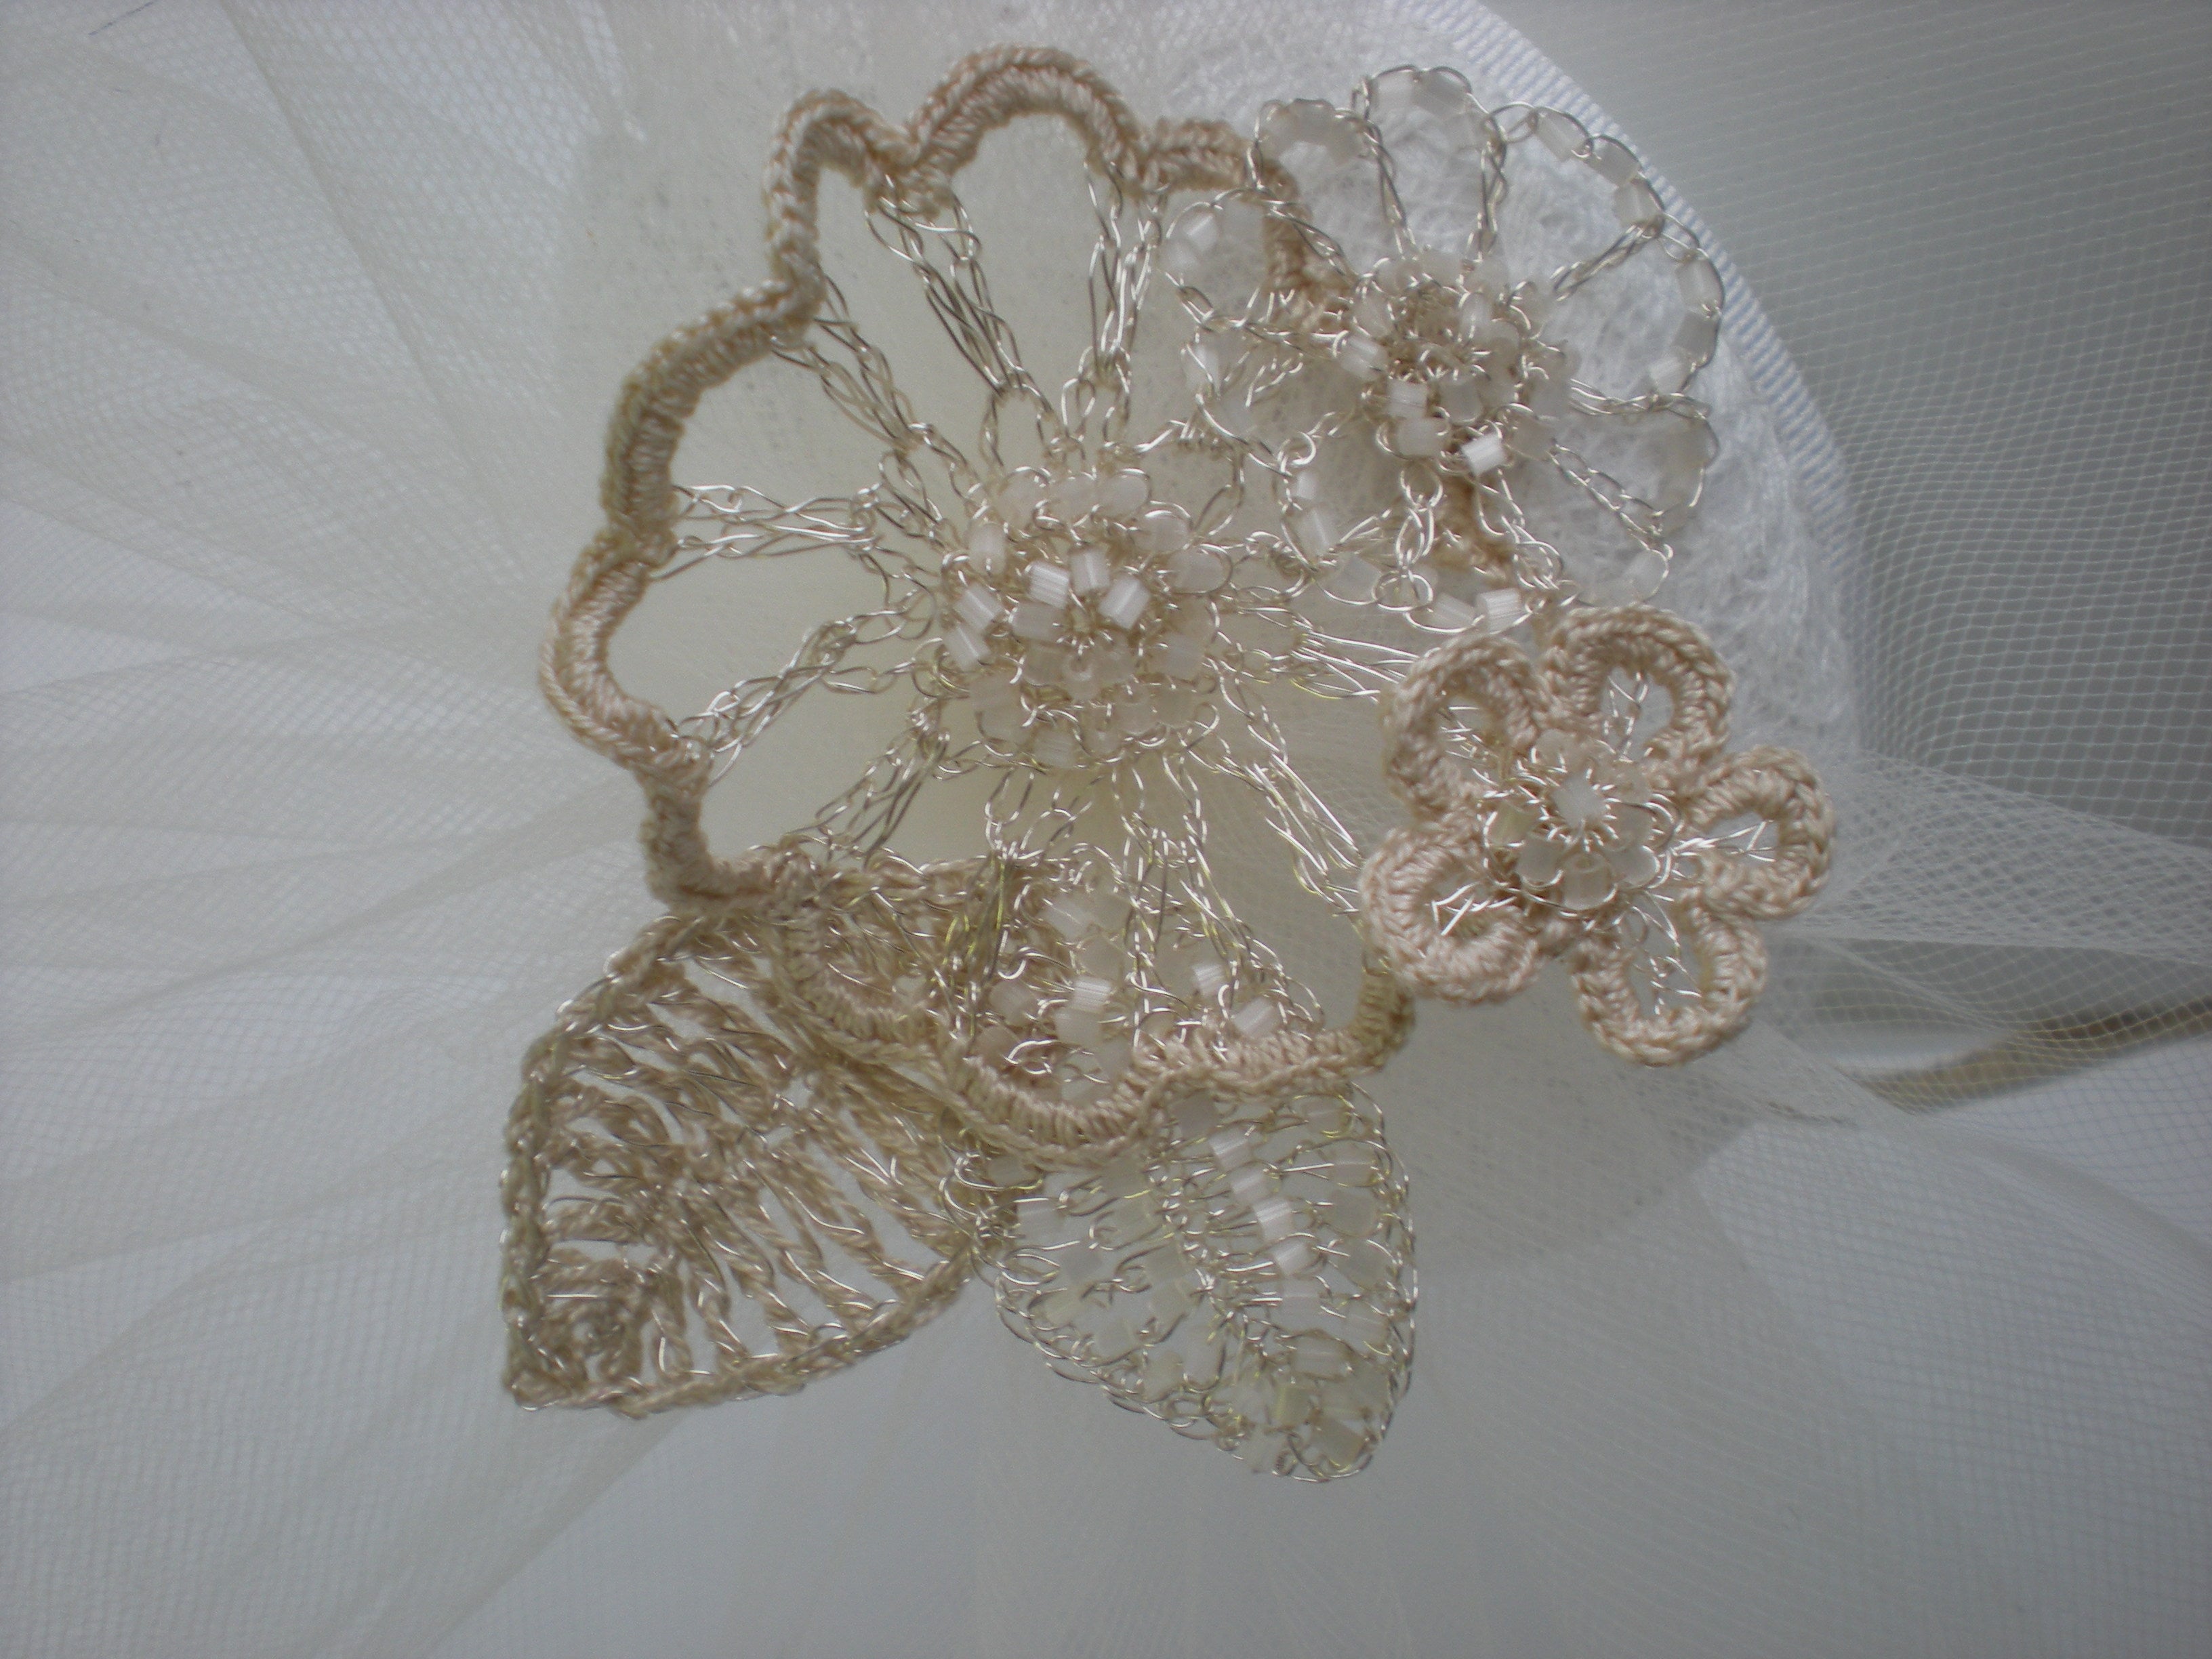 Off white Fascinator for Wedding or Spring Events